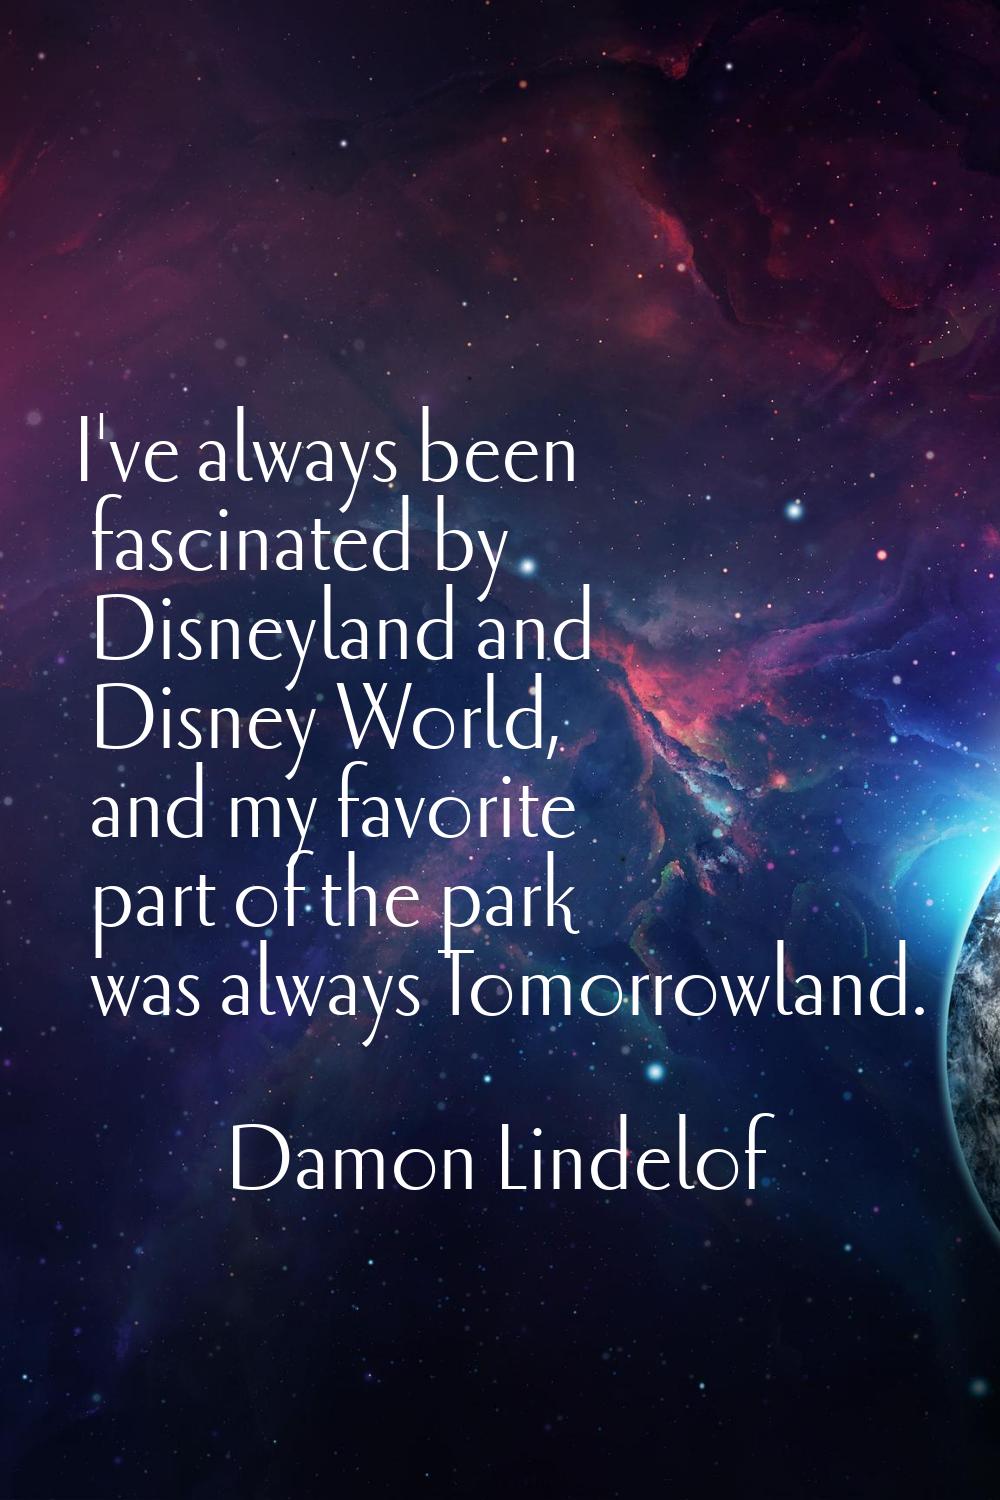 I've always been fascinated by Disneyland and Disney World, and my favorite part of the park was al